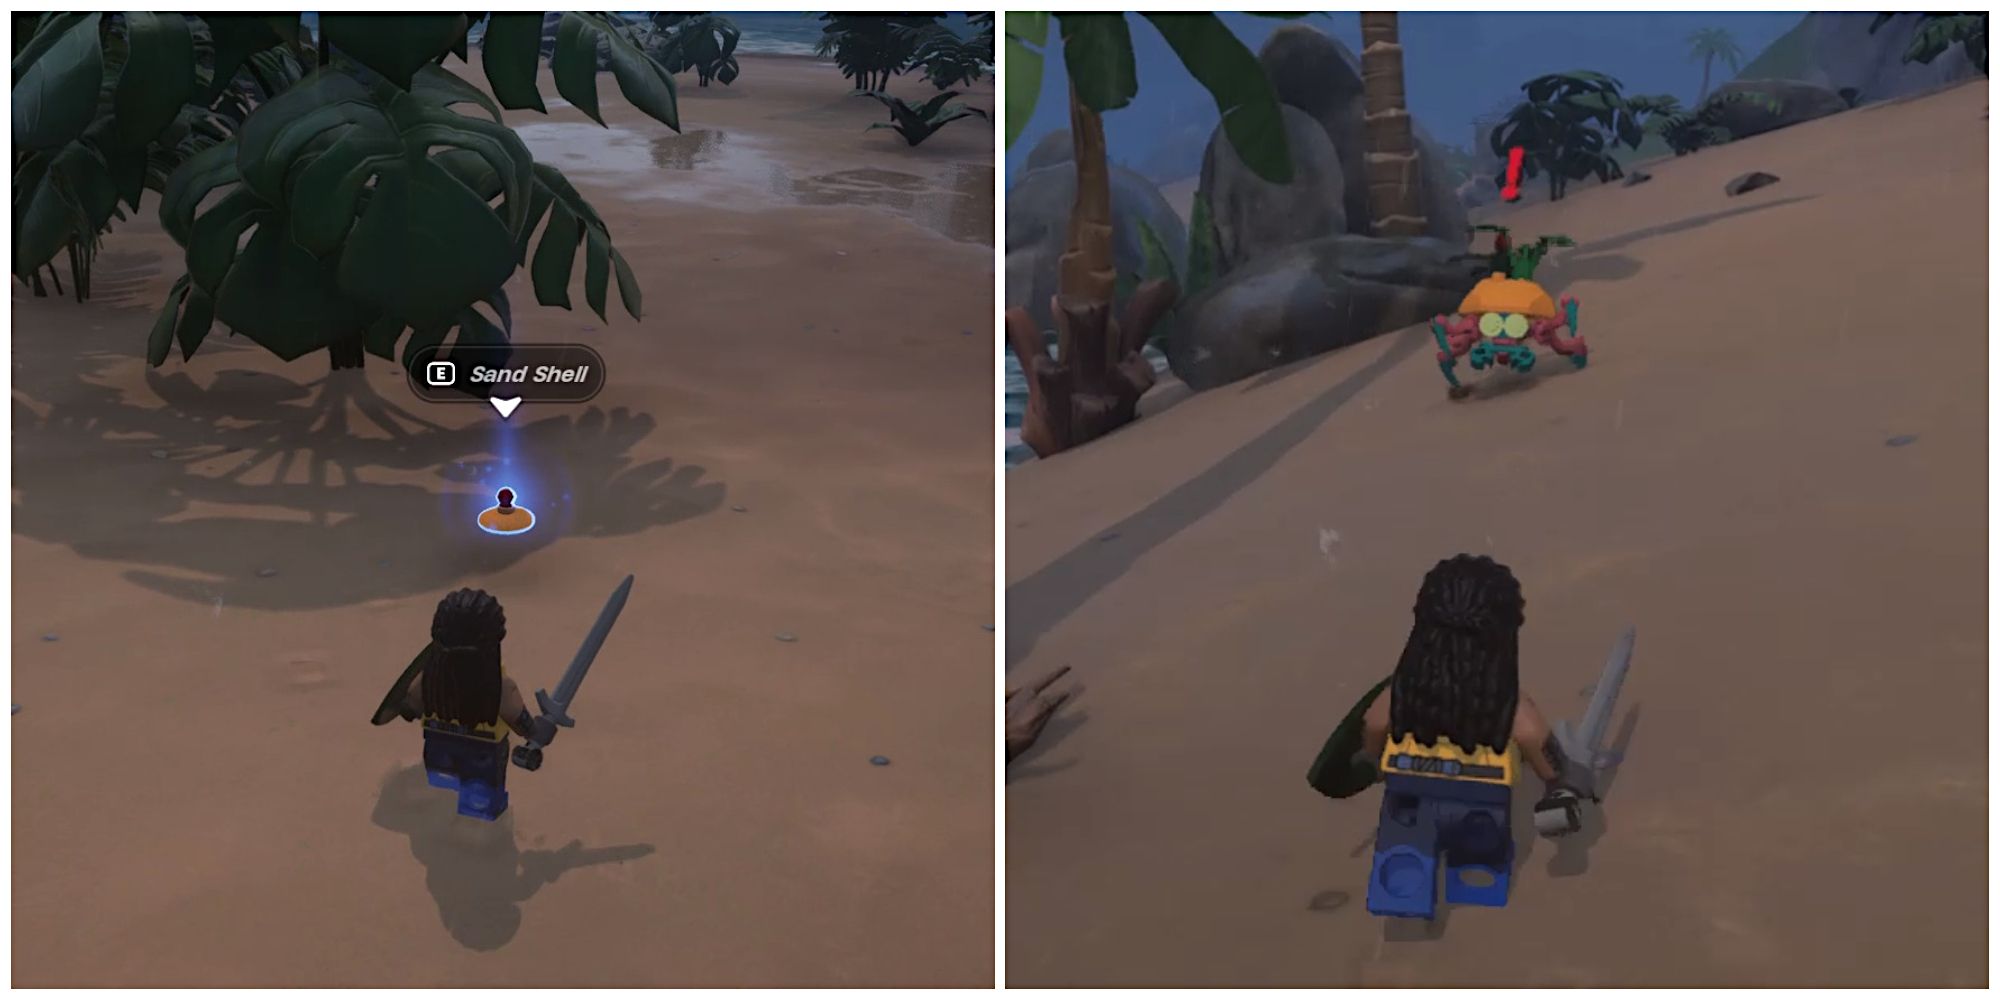 Split image of a character in front of a Sand Shell and a character in front of a Sand Roller in Lego Fortnite